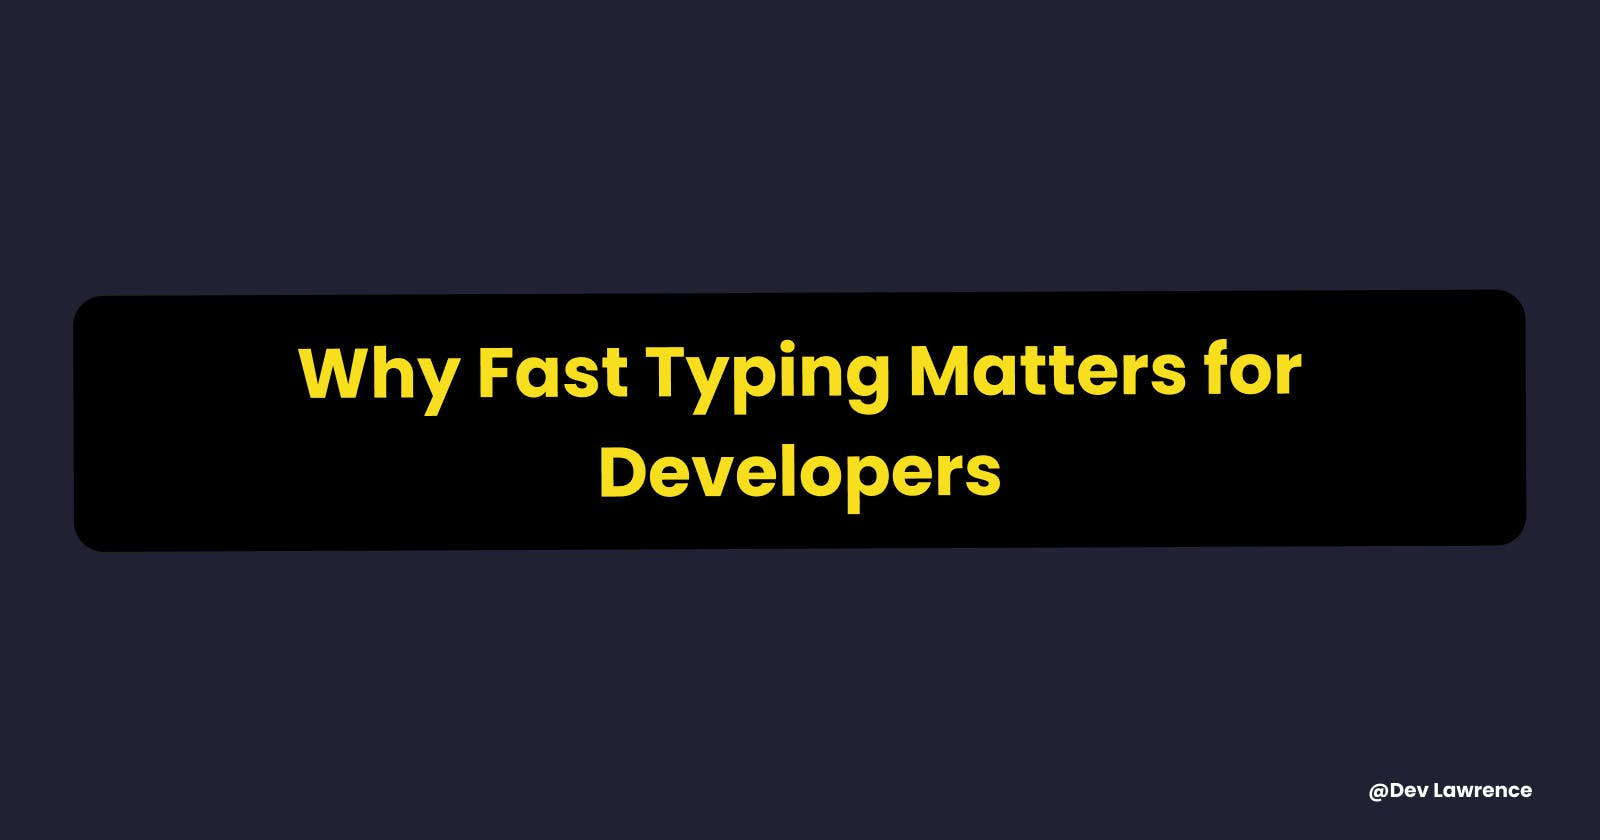 Turbocharge Your Coding: How Fast Typing Boosts Developer Productivity